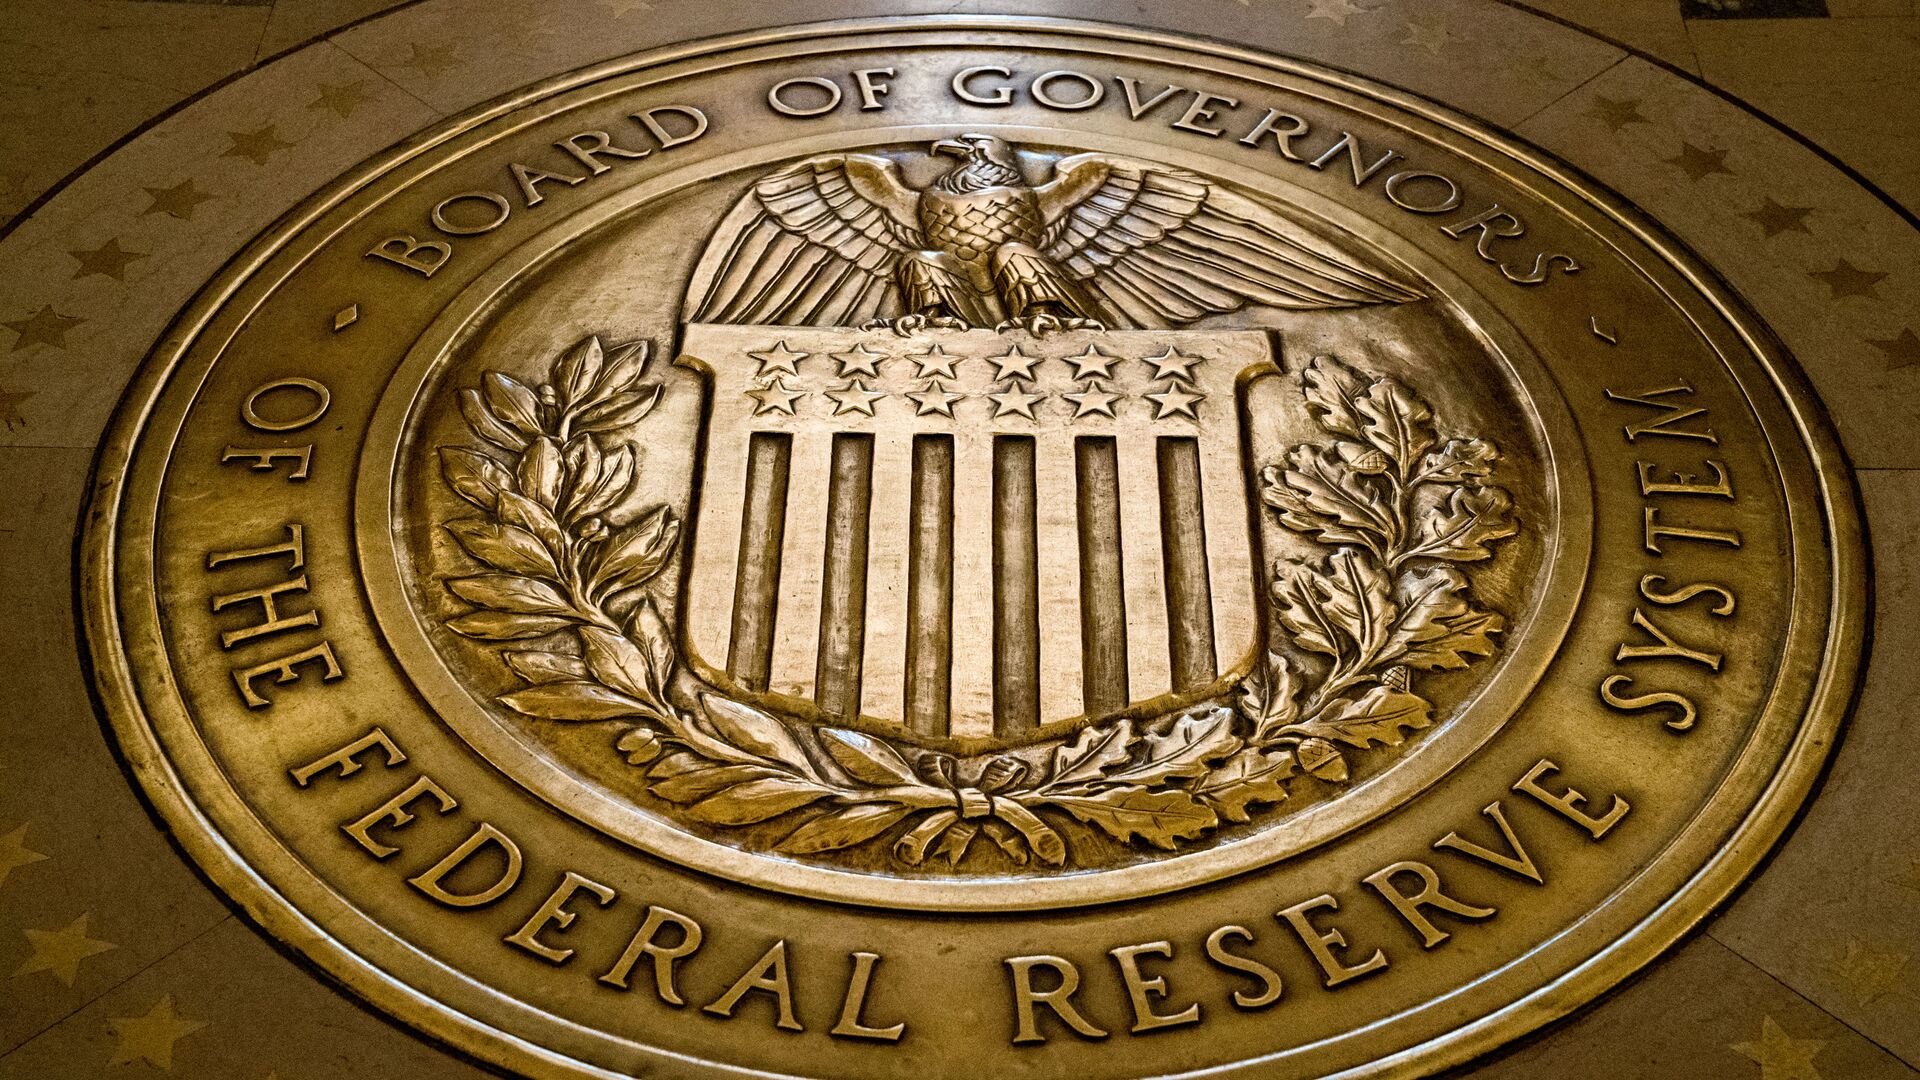 FILE- In this Feb. 5, 2018, file photo, the seal of the Board of Governors of the United States Federal Reserve System is displayed in the ground at the Marriner S. Eccles Federal Reserve Board Building in Washington. Richard Clarida, President Donald Trump's nominee for the No. 2 post at the Federal Reserve, pledged on Tuesday, May 15, to support the Fed's twin goals of stabilizing inflation and maximizing employment while also declaring the importance of the central bank’s independence.  - Sputnik International, 1920, 04.05.2022